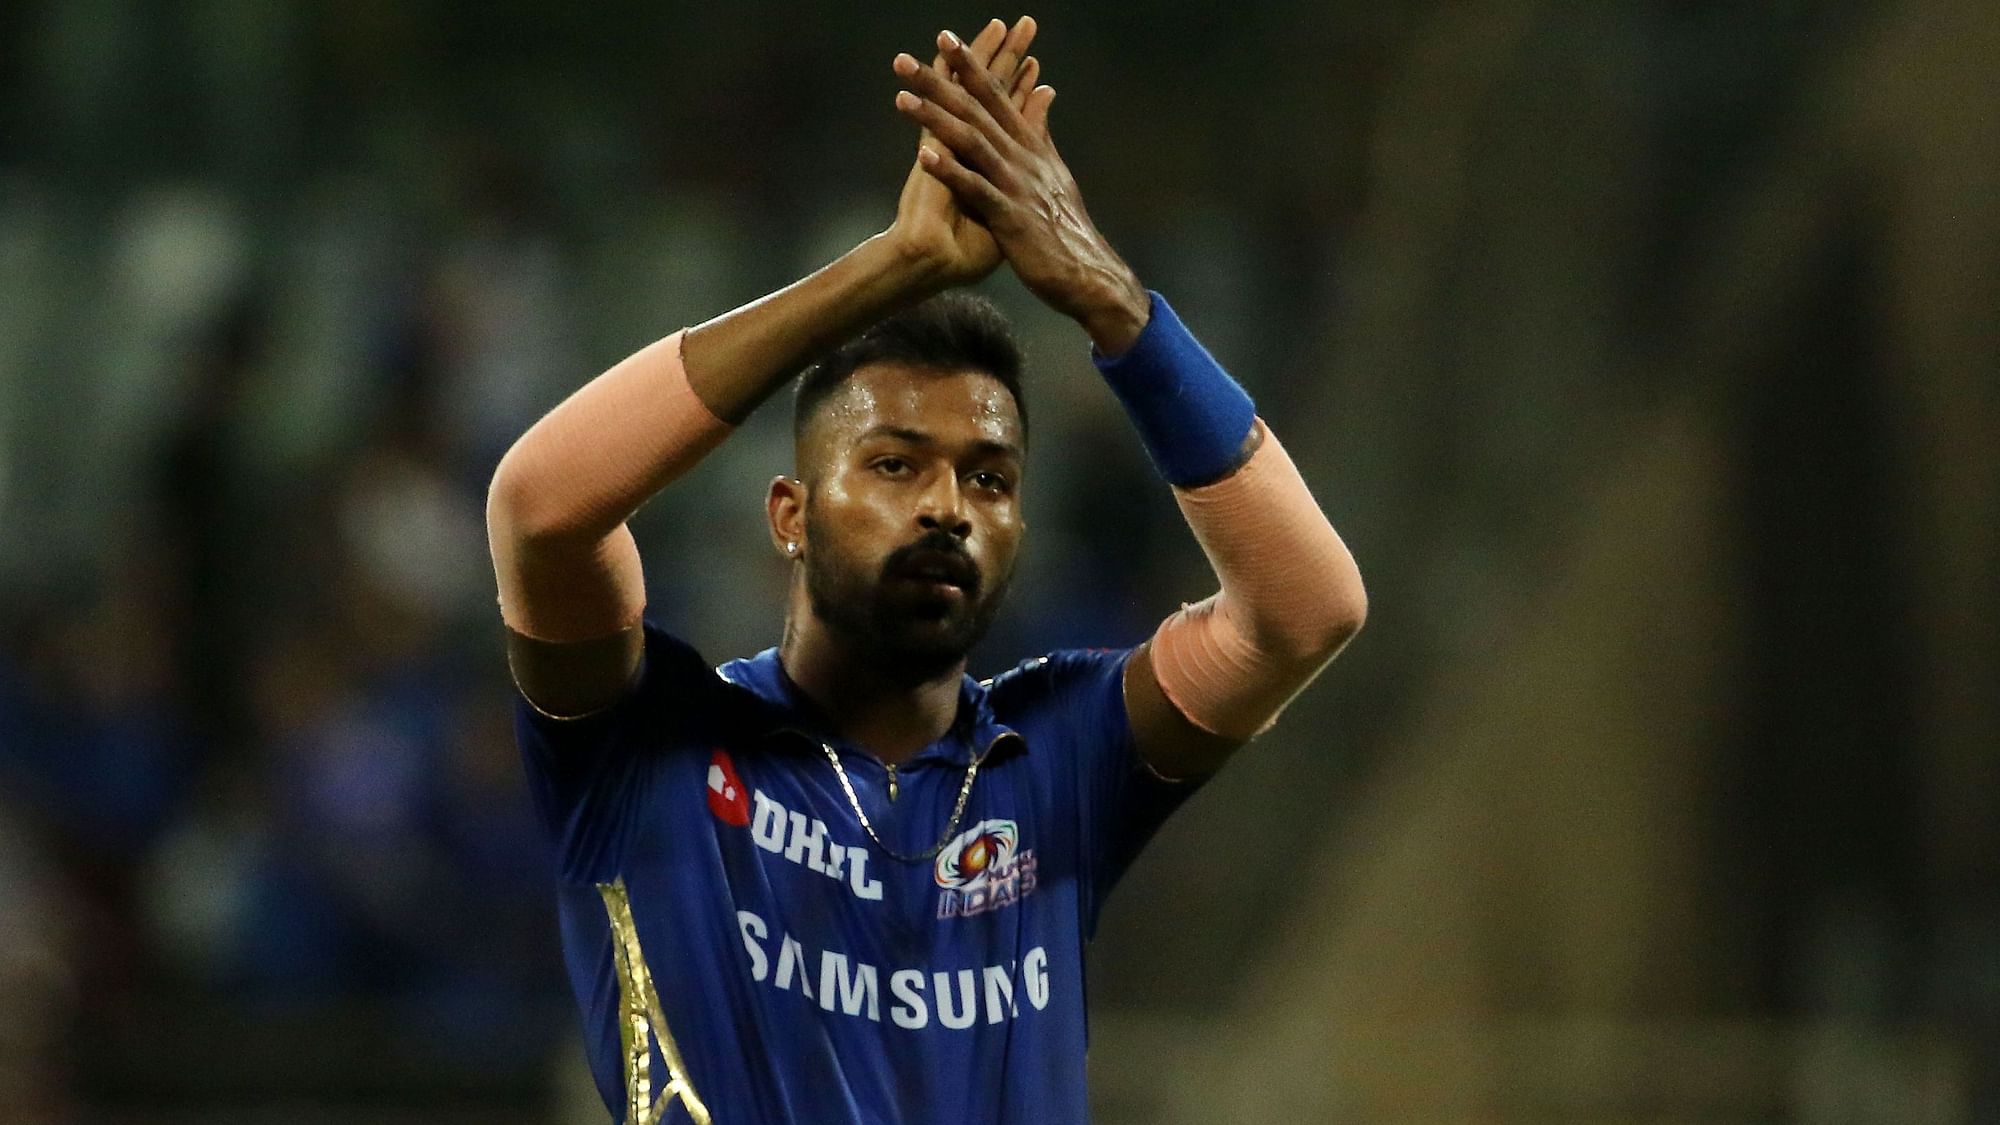 The all rounder has been key to Mumbai Indians’ success this season.